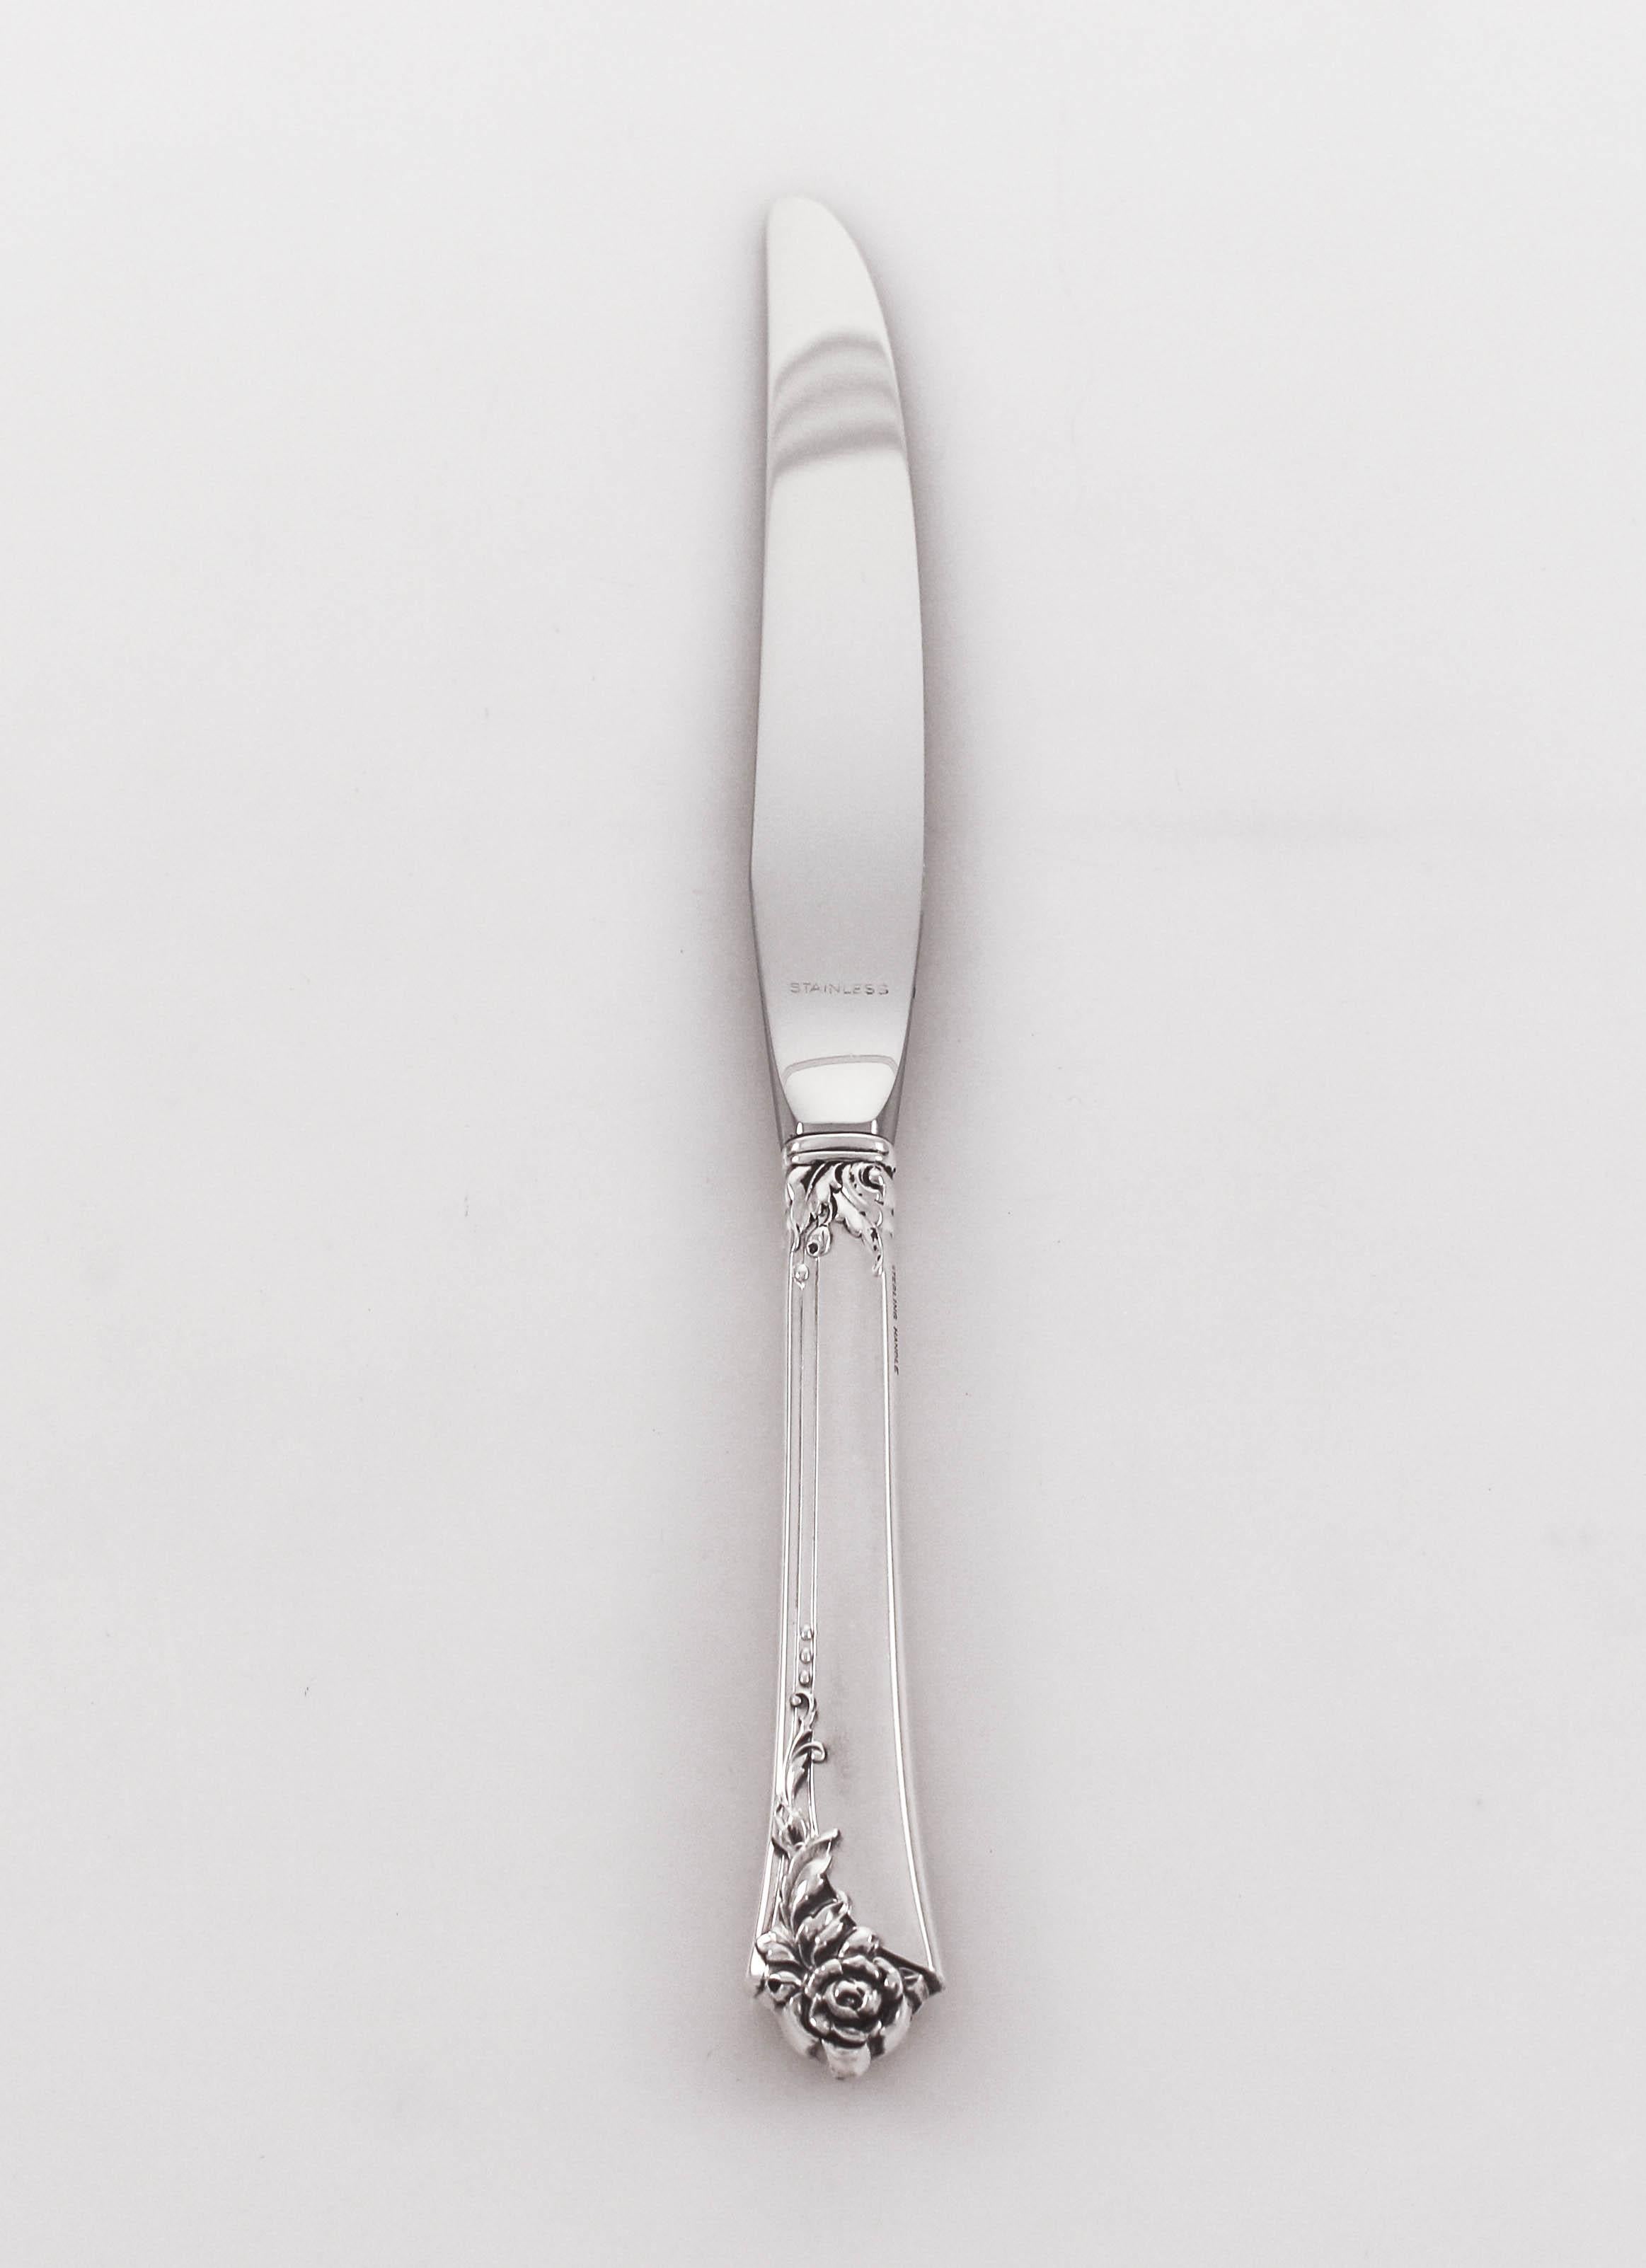 We are thrilled to offer this set of sterling silver flatware from 1946. A complete set of 16 settings with double dessert spoons (i.e., ice cream and tea). It has a modern look with just a hint of decoration on the bottom edge. A complete set is